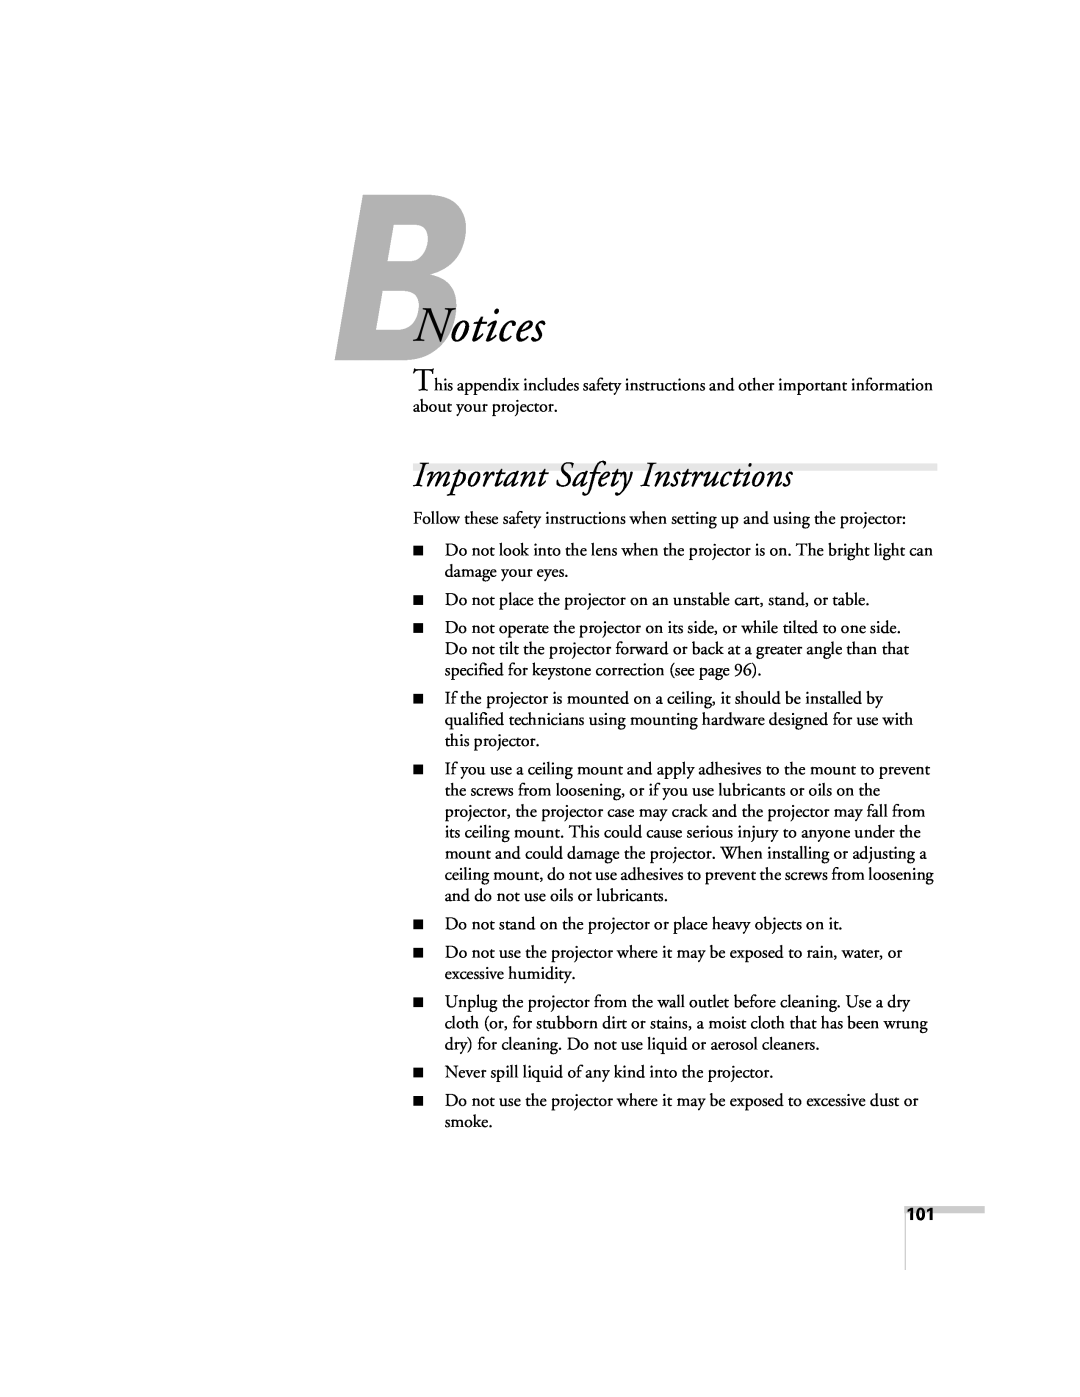 Univex 700 manual BNotices, Important Safety Instructions 